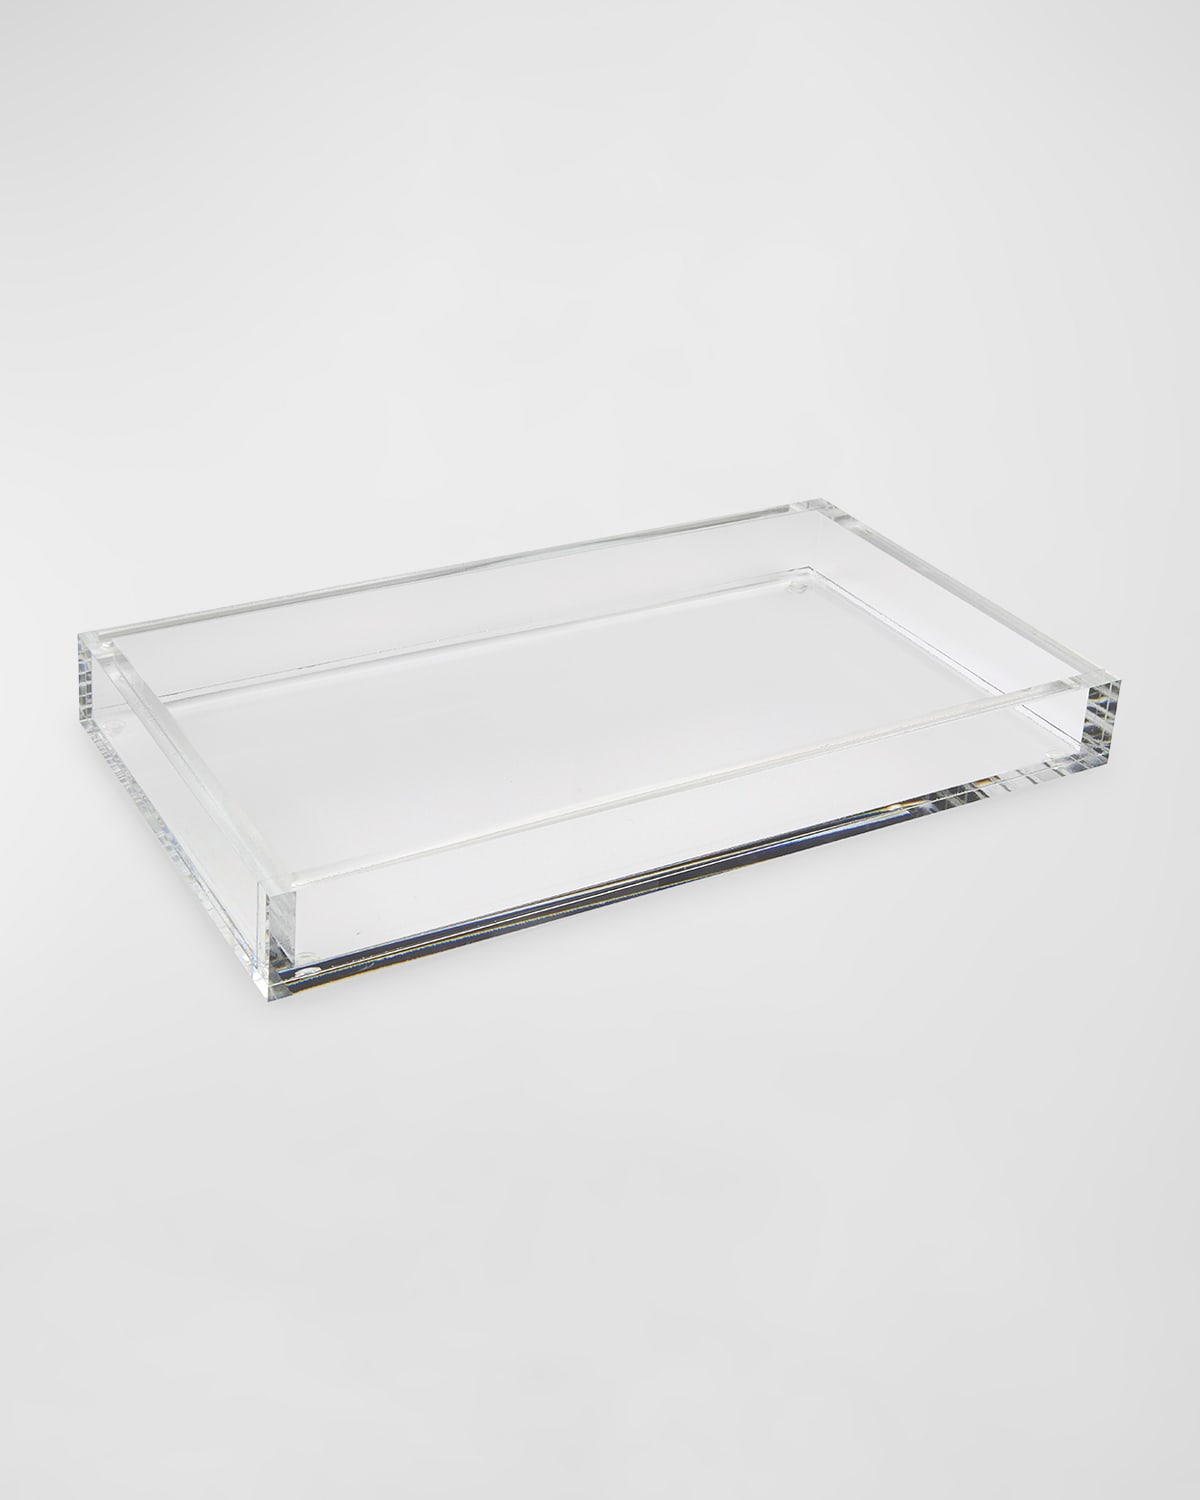 Tizo Lucite Tray In Clear